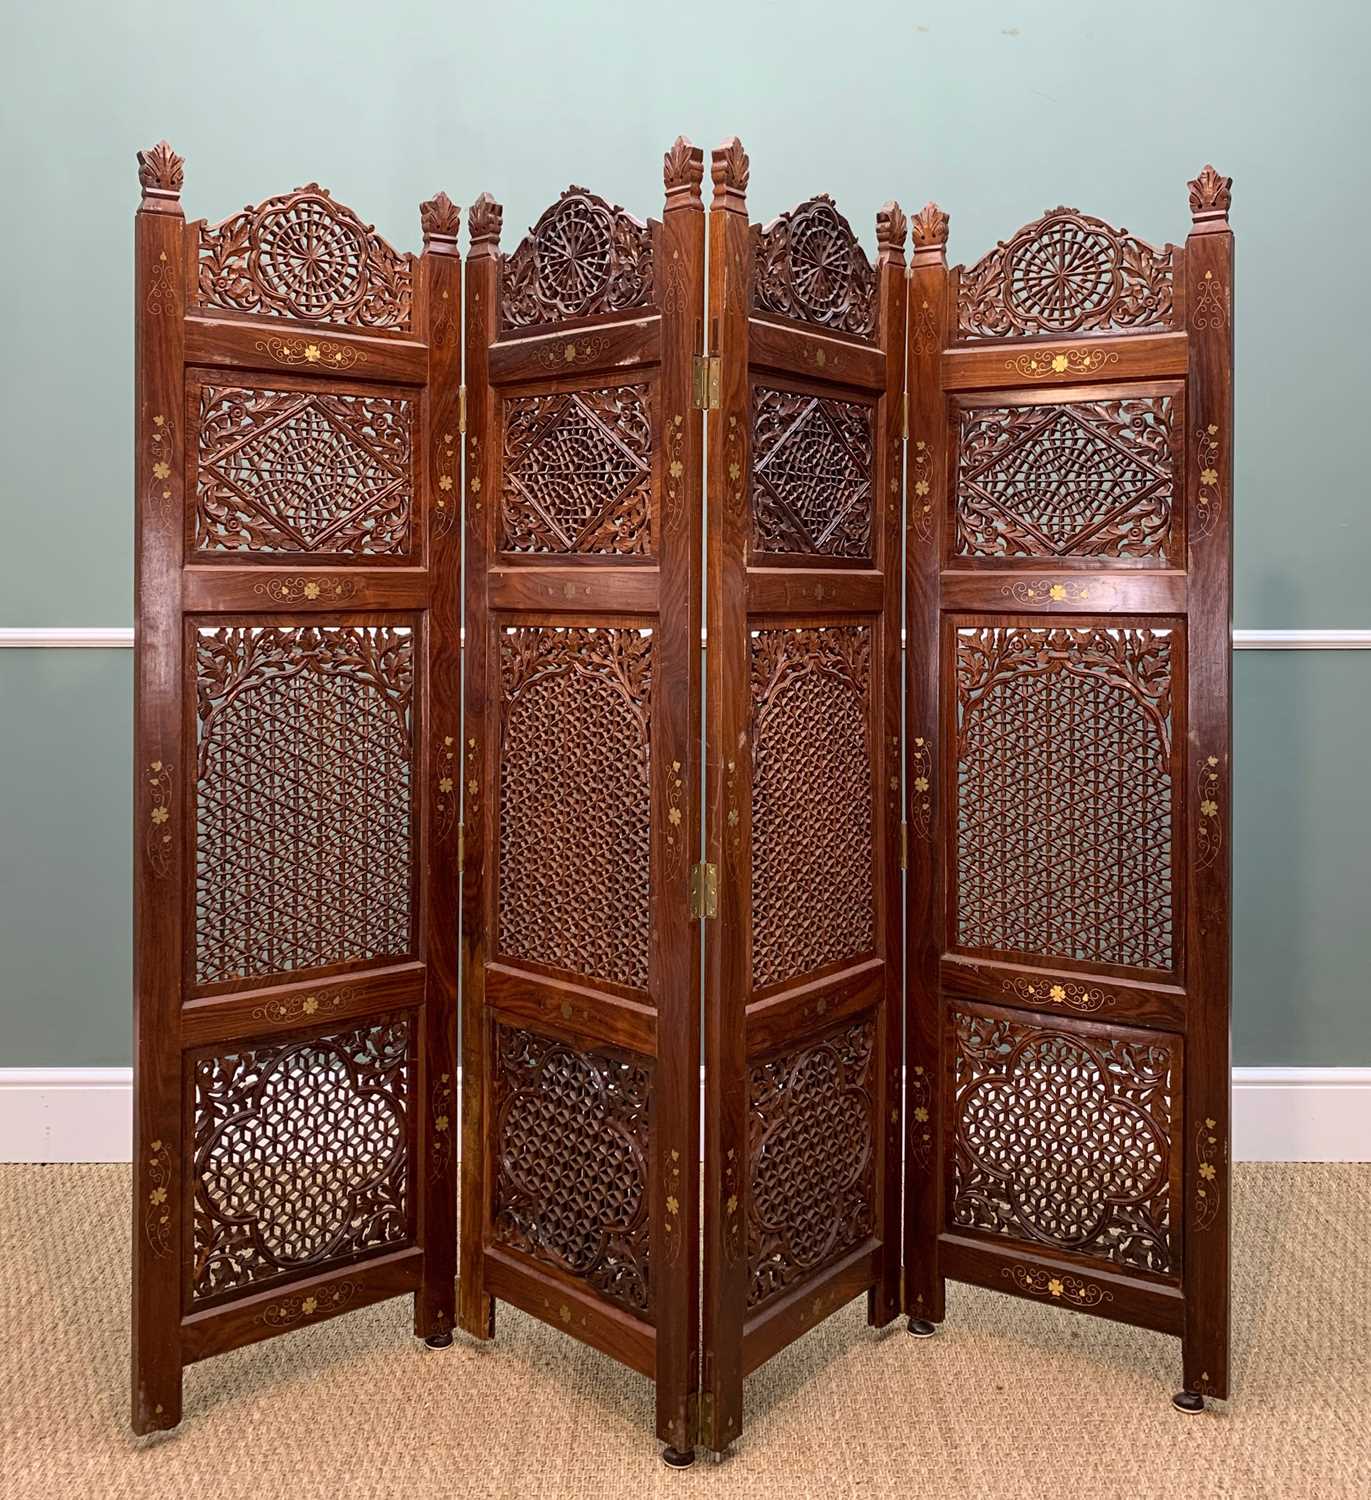 INDIAN FOUR-LEAF HARDWOOD SCREEN, Hoshiapur, pierced with leaves and geomtric panels in the